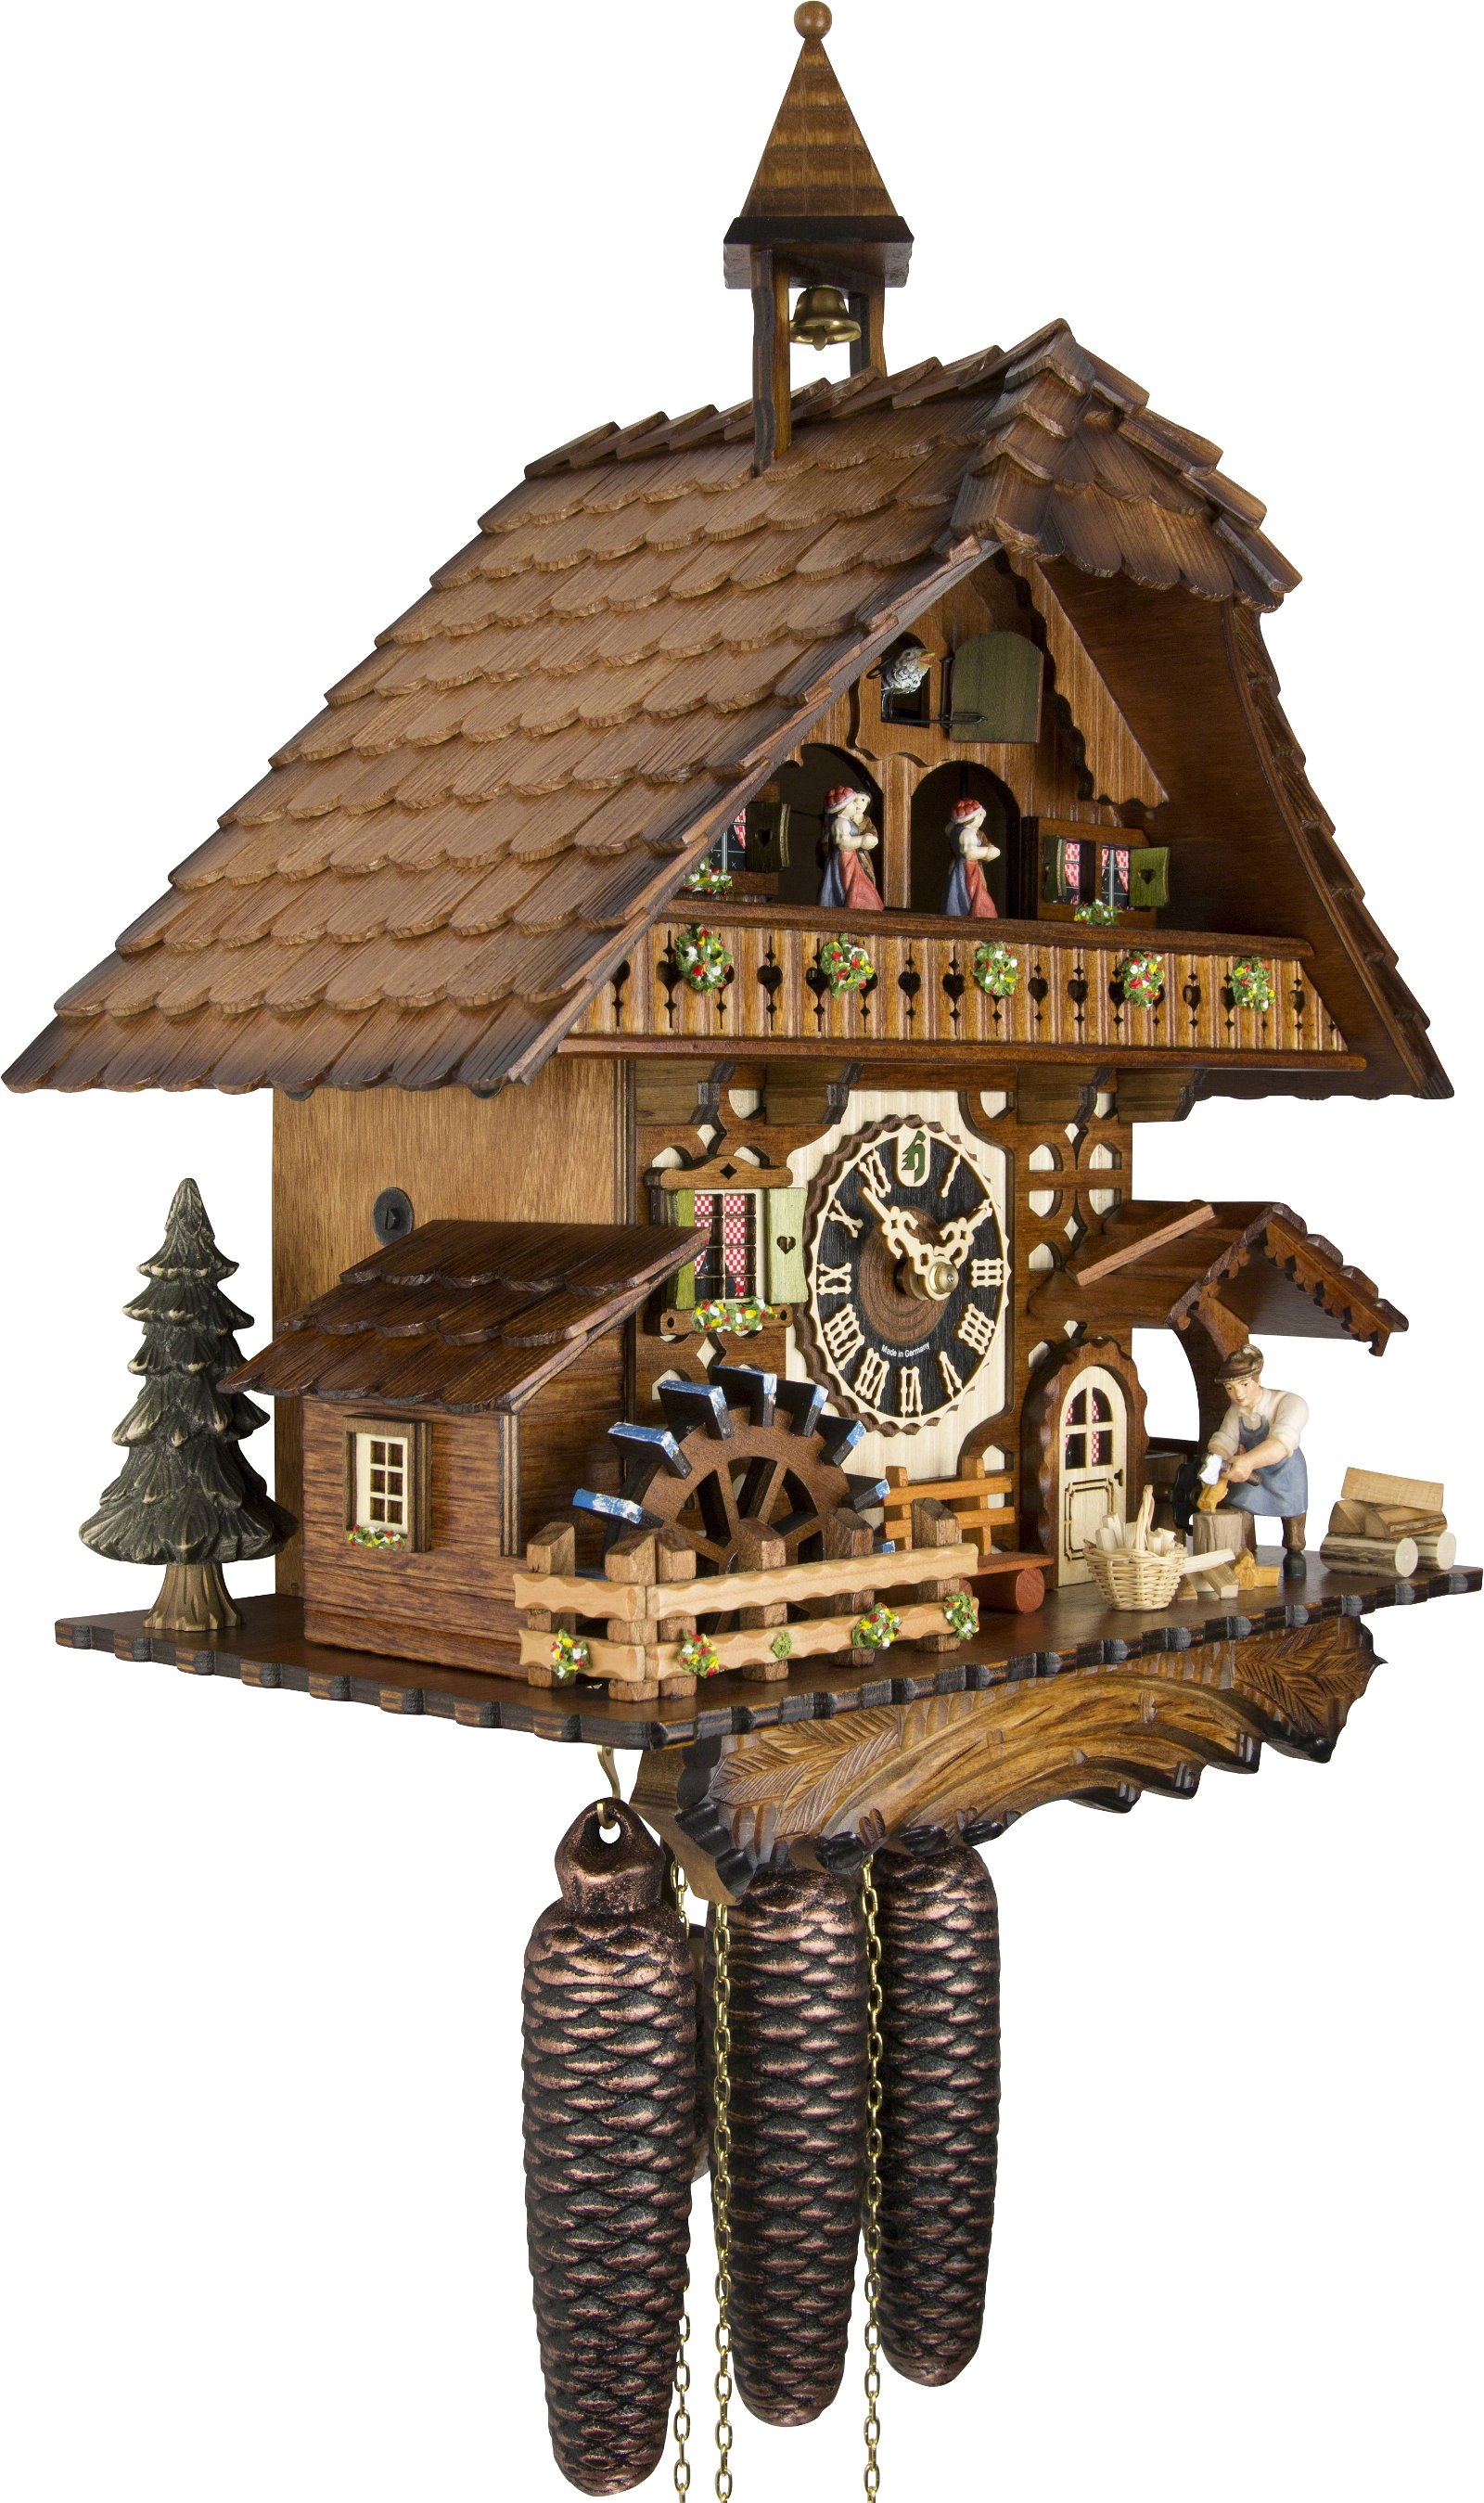 Cuckoo Clock Chalet Style 8 Day Movement 47cm by Hönes